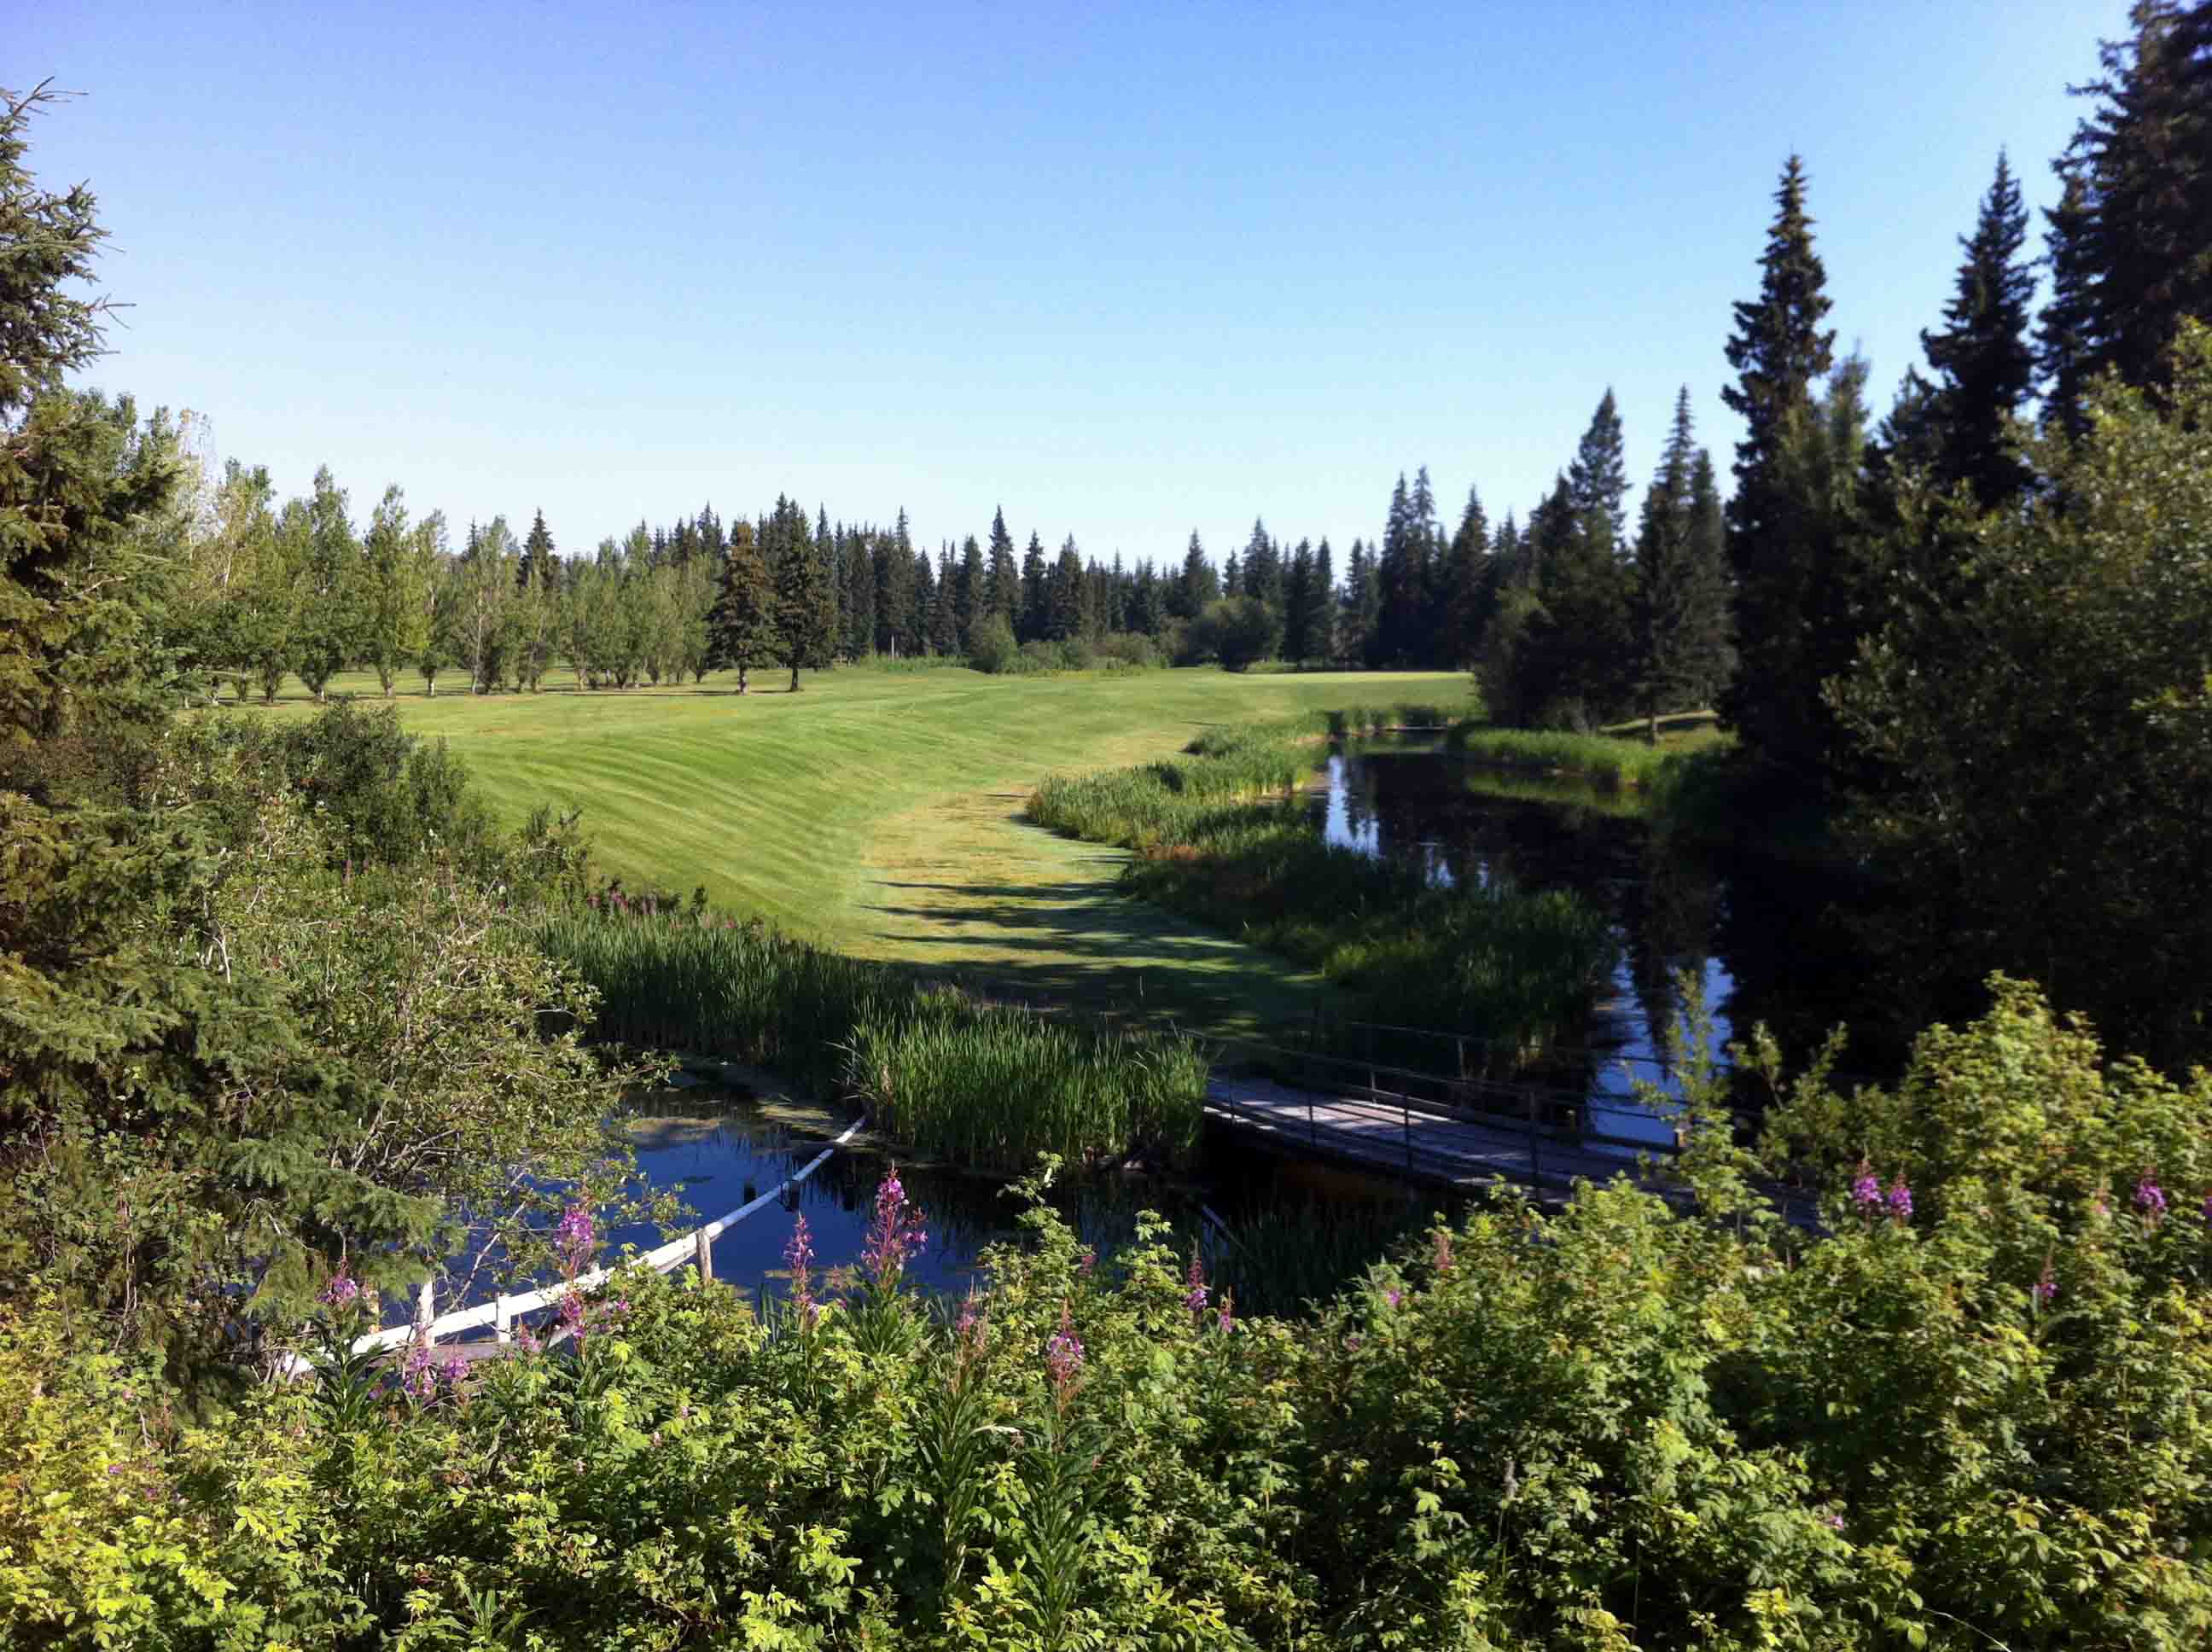 Solid Round at Aspen Grove Golf Course in Prince George, BC